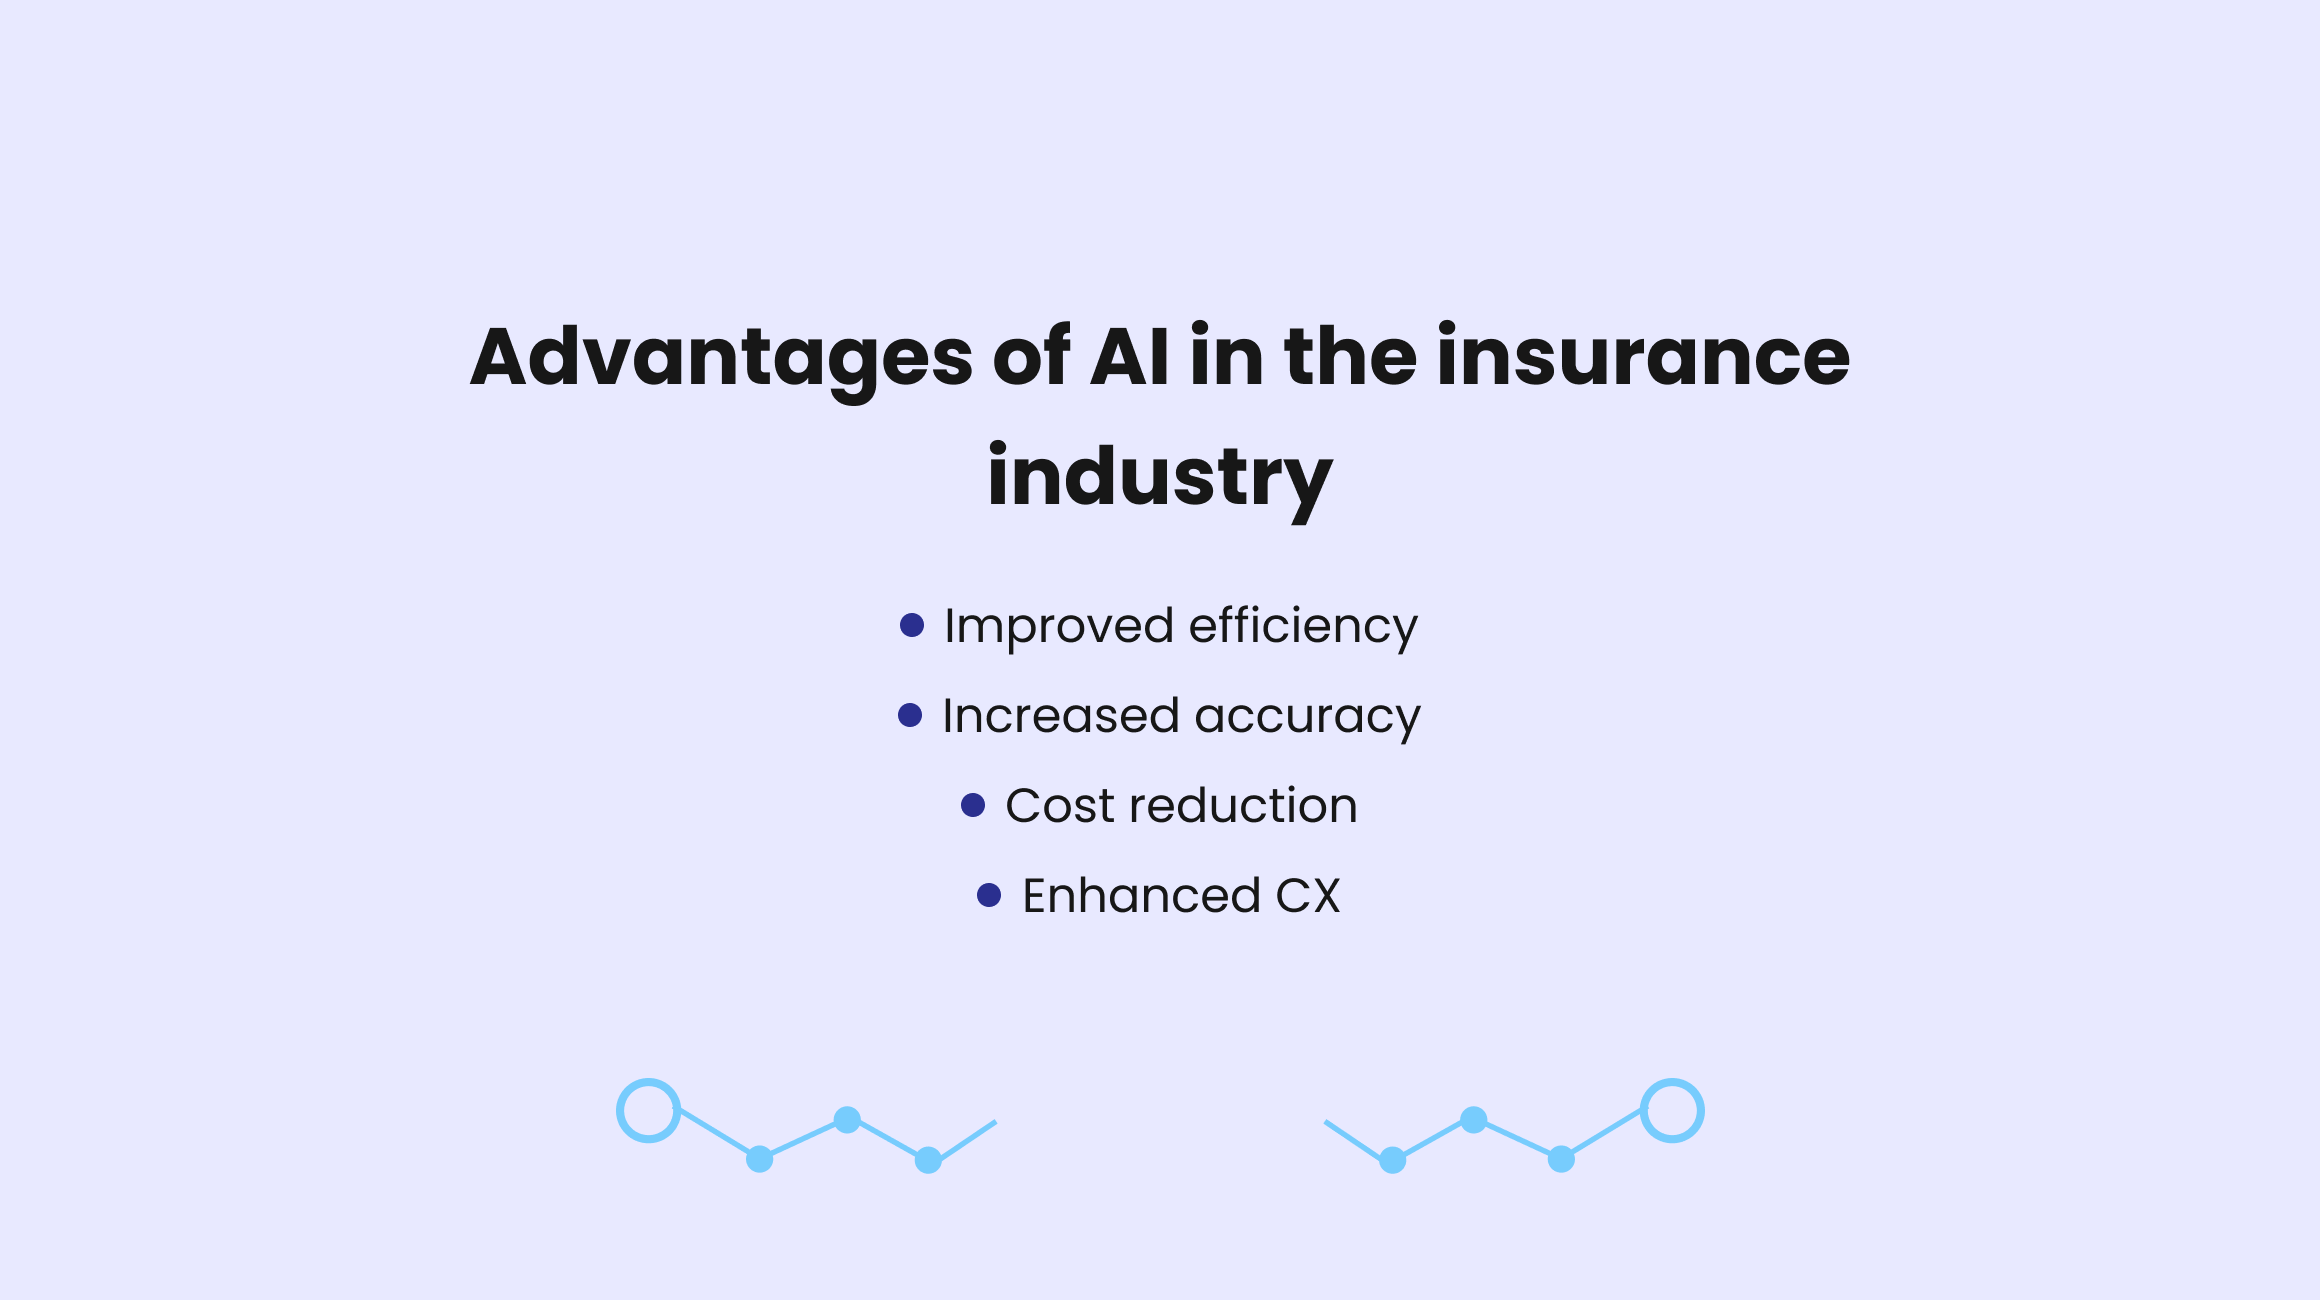 Advantages of AI in insurance